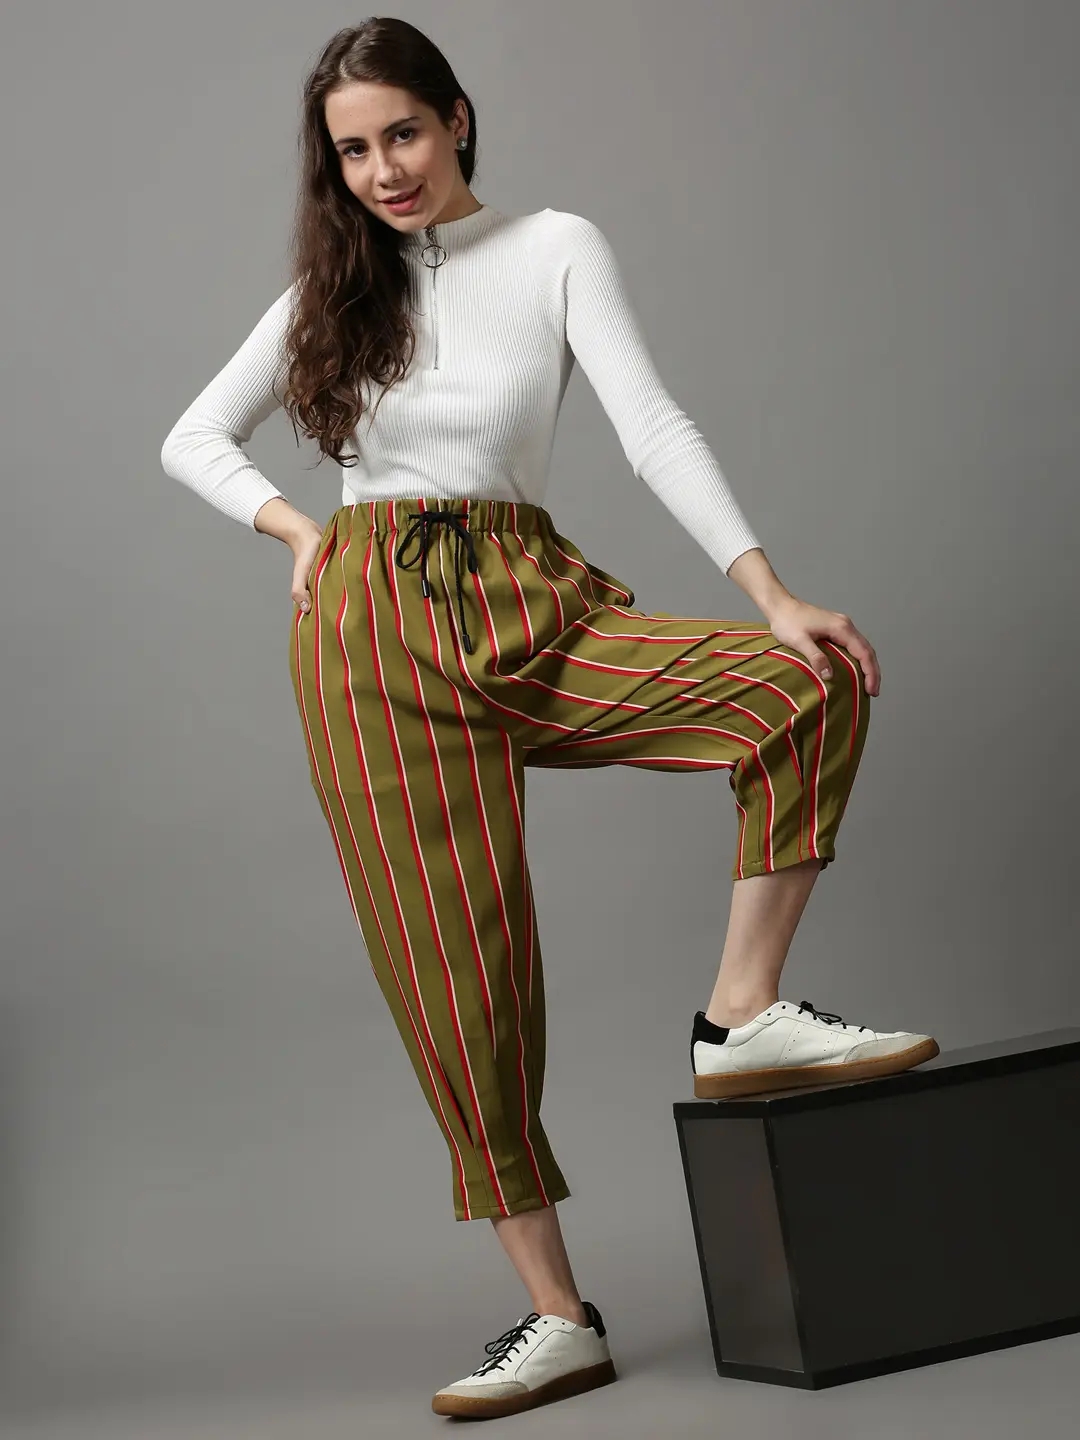 Women's Green Polyester Striped Trousers